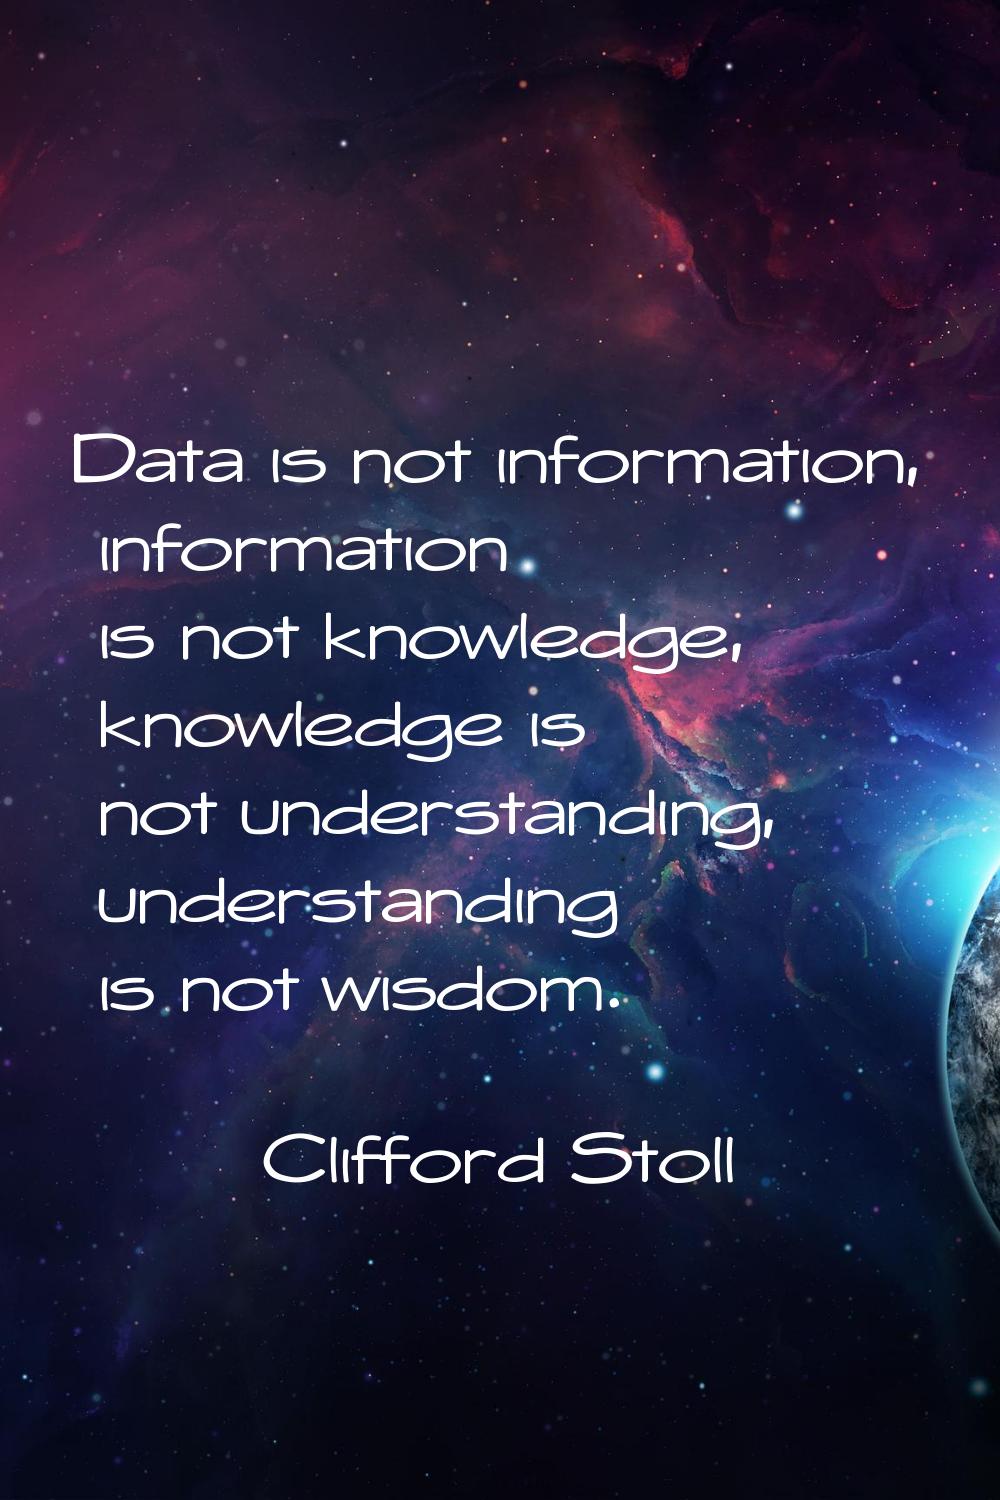 Data is not information, information is not knowledge, knowledge is not understanding, understandin